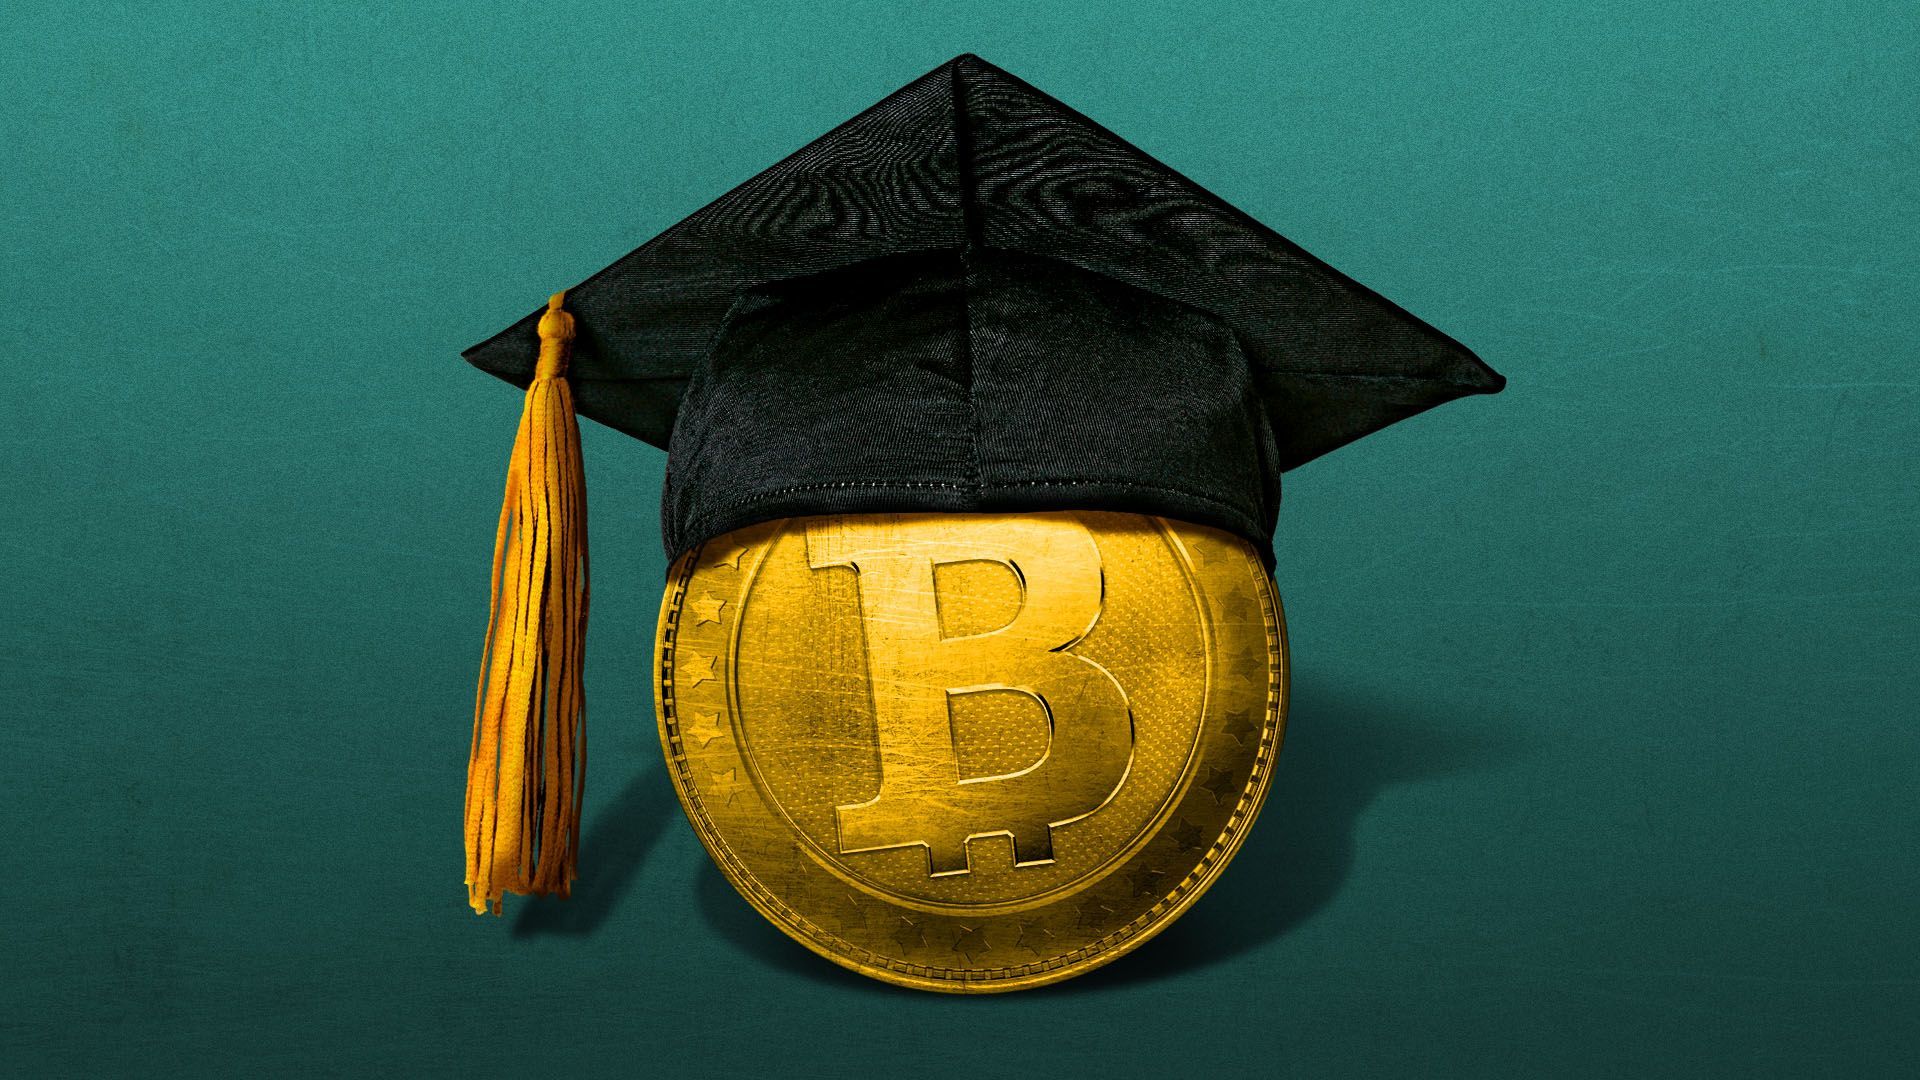 Illustration of a gold coin with a bitcoin logo wearing a graduation cap